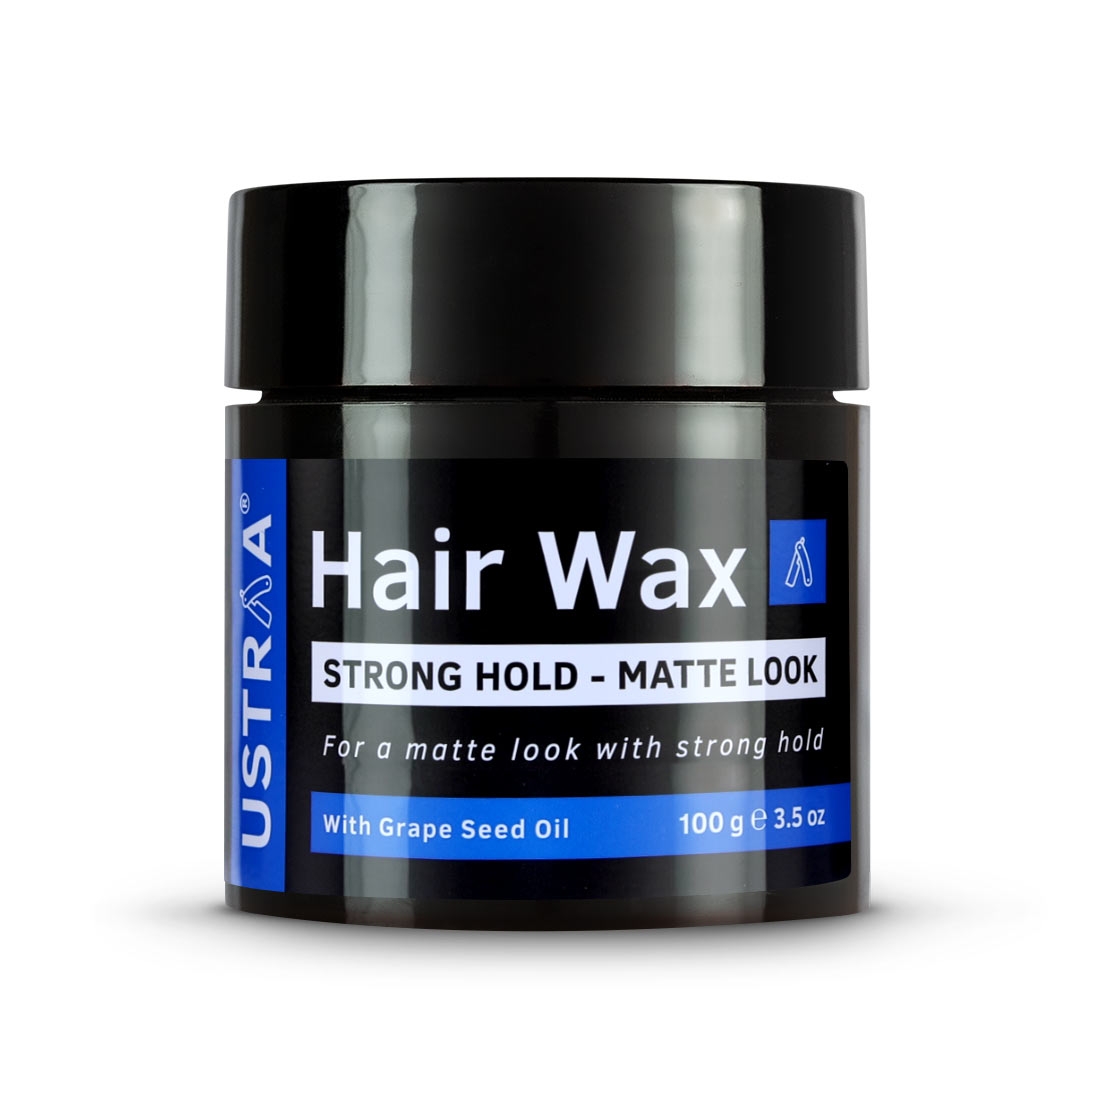 Ustraa | Hair Wax - Strong Hold - Matte Look 100g